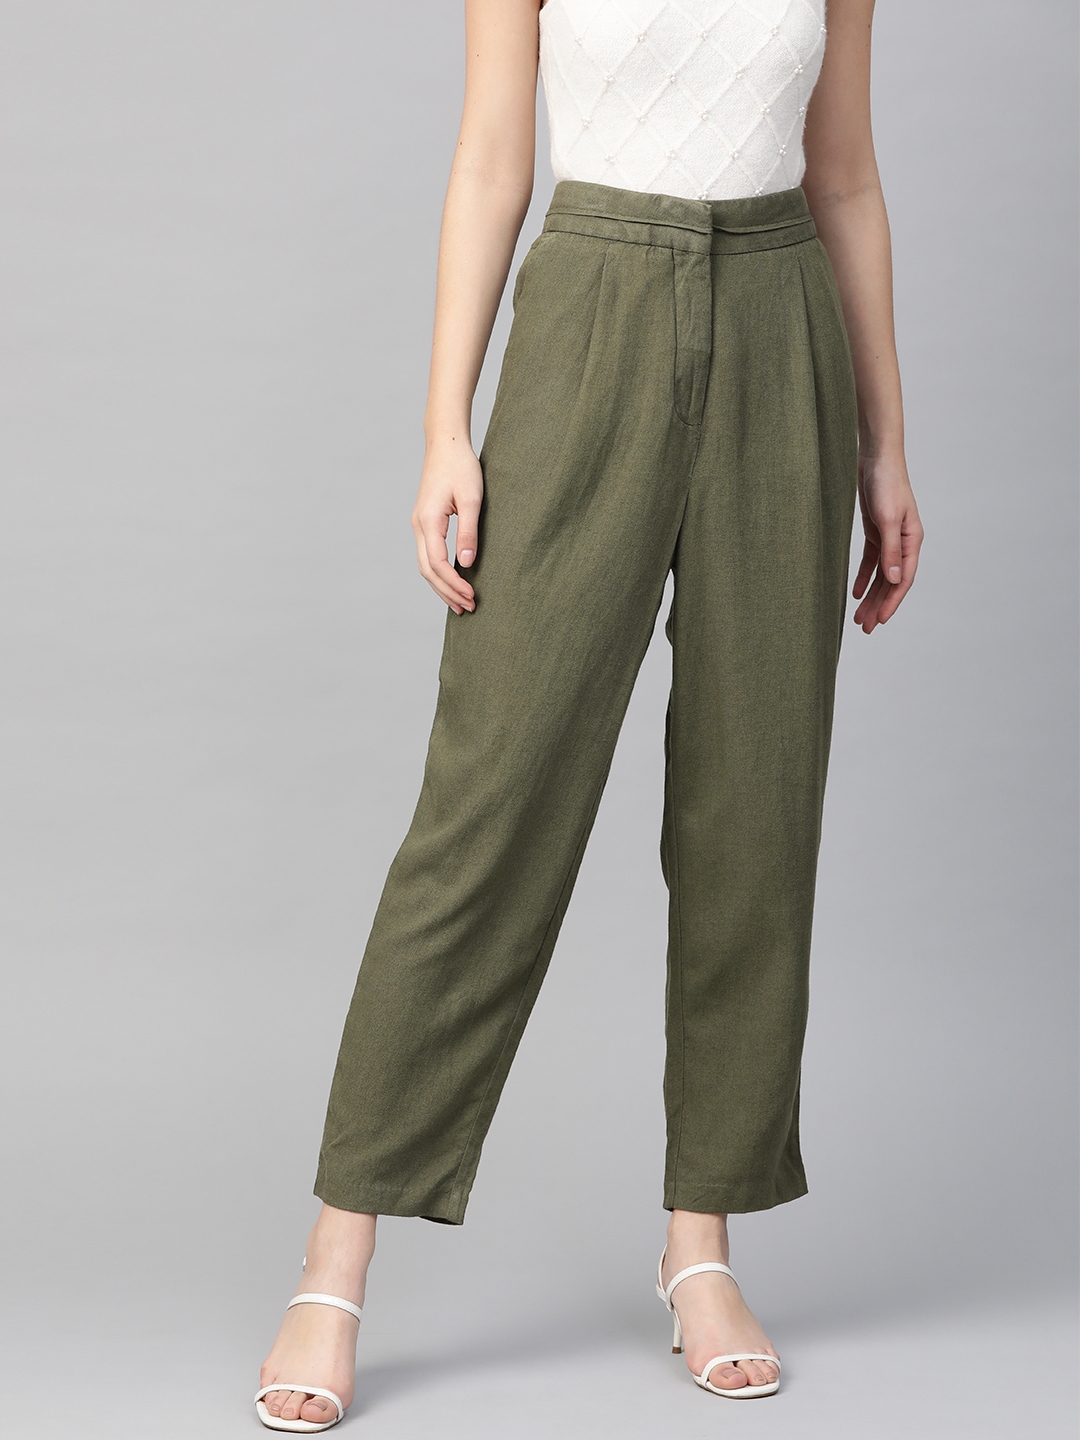 Buy Marks & Spencer Women Olive Green Trousers - Trousers for Women ...